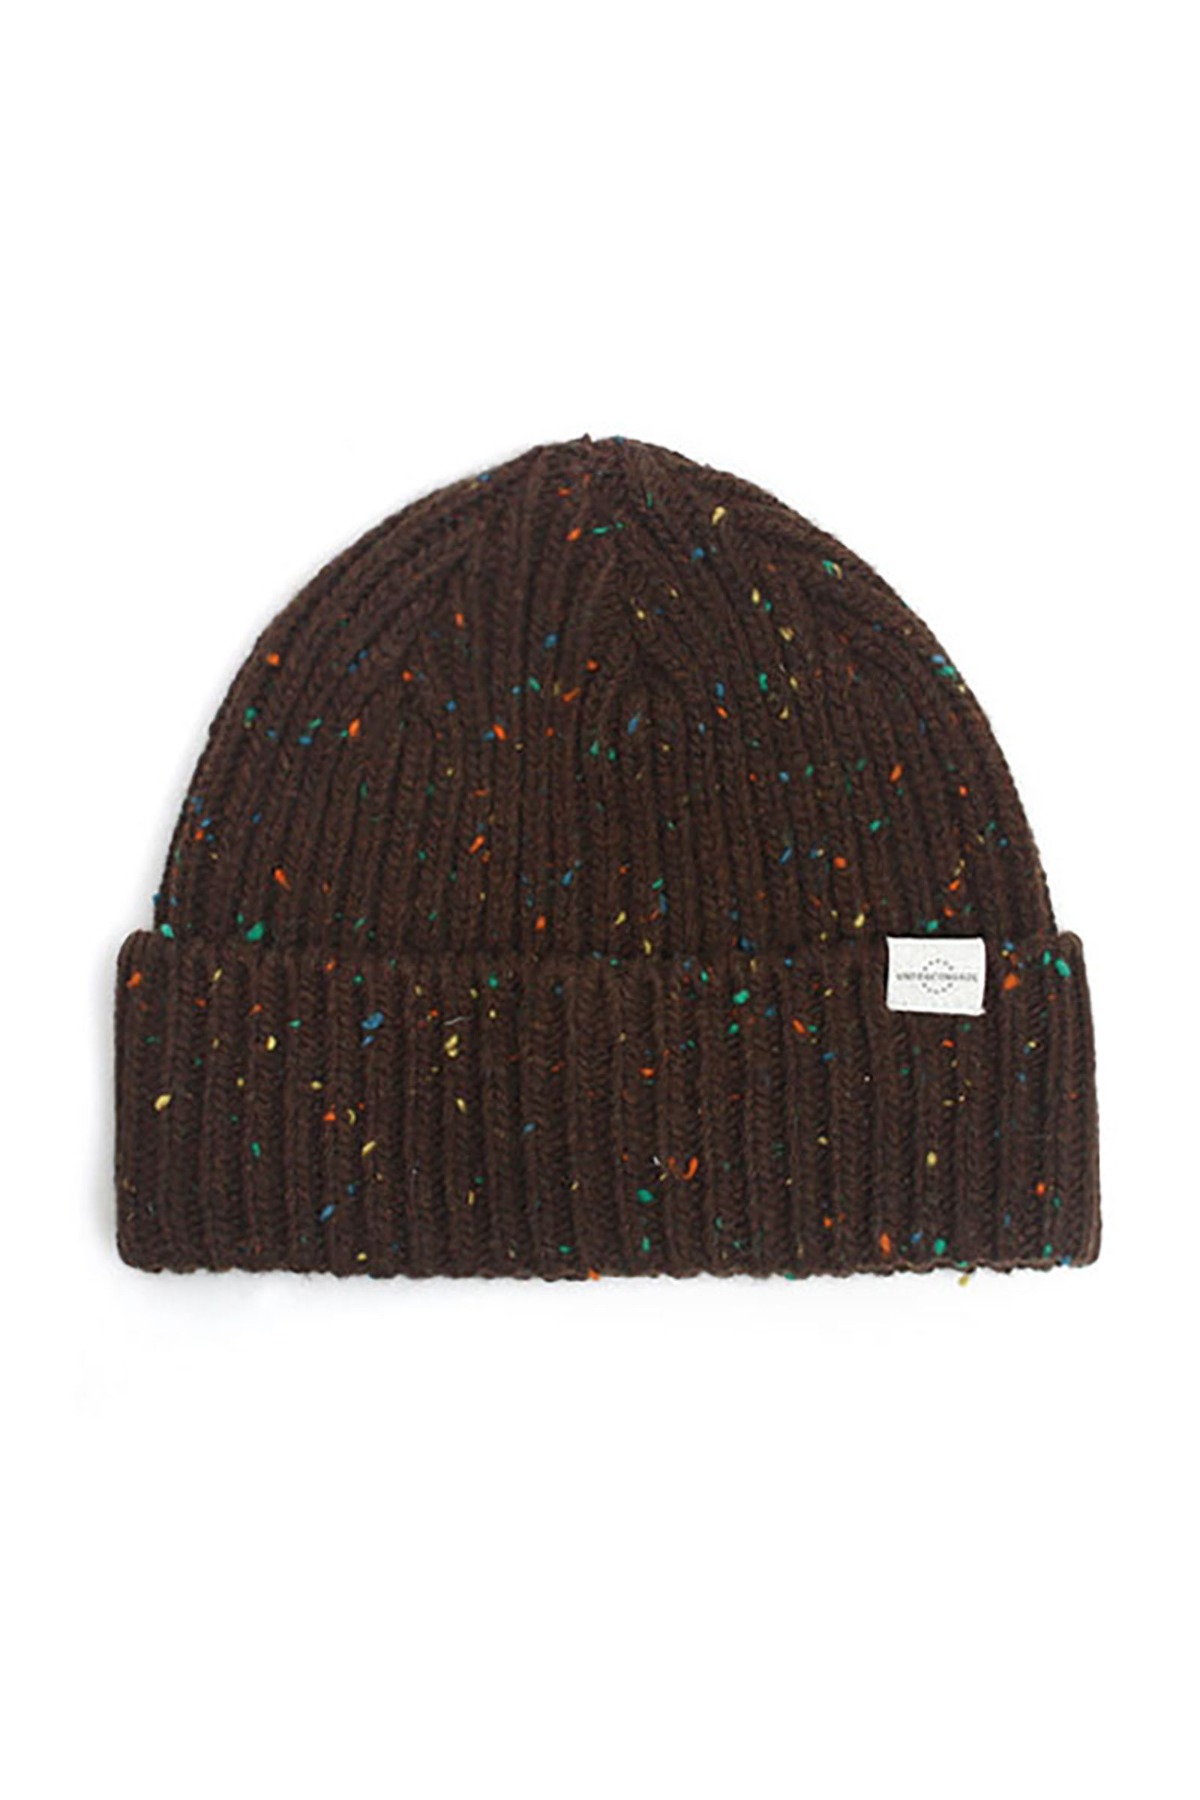 BEANIE / BOLD FIT / WOOL / NEP BROWN (BOX PACKAGE)